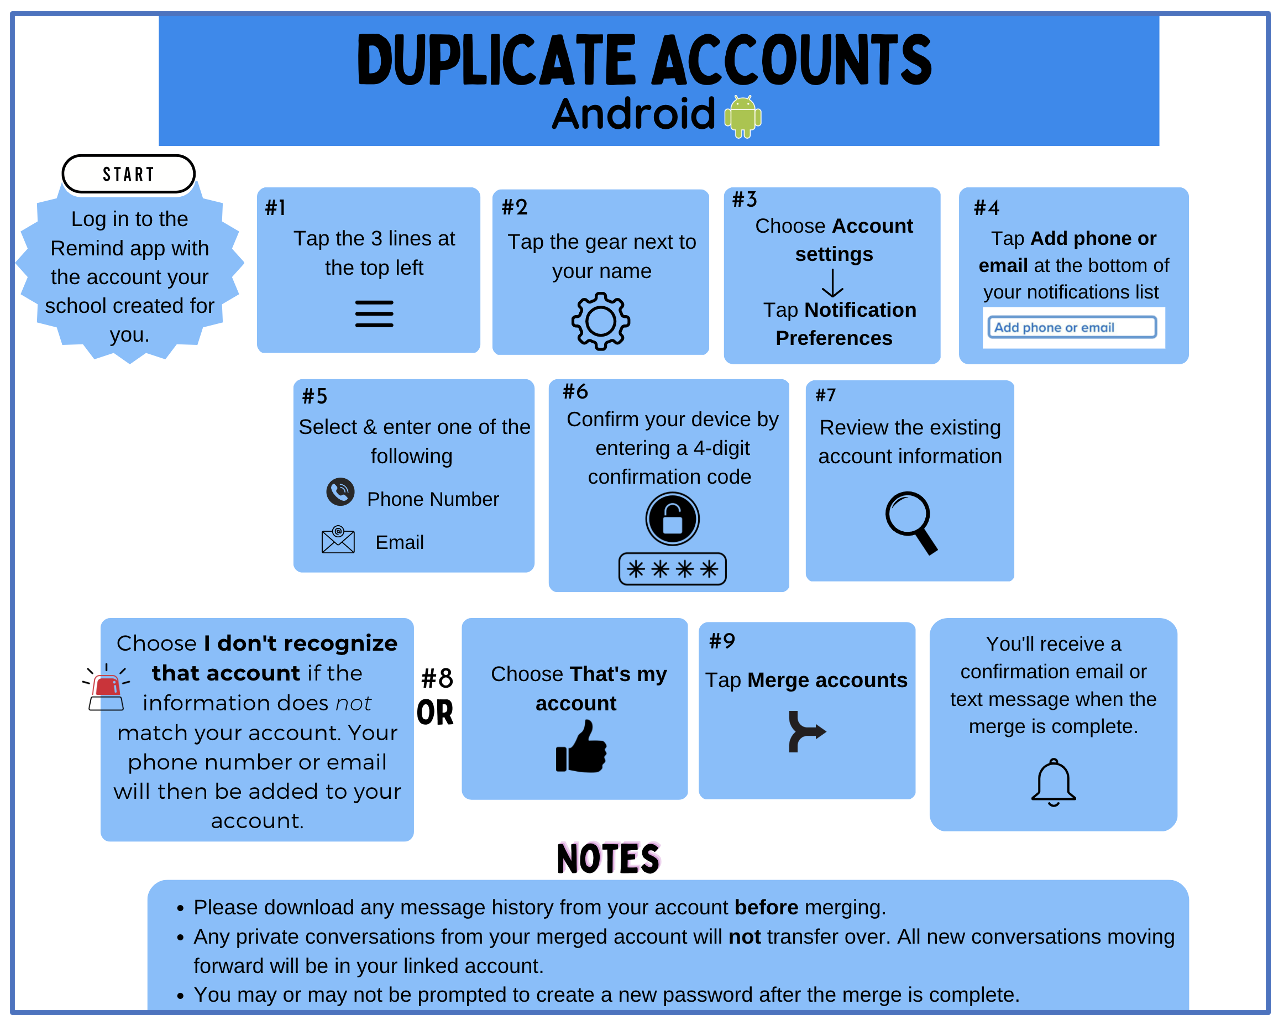 duplicate accounts - Android.png